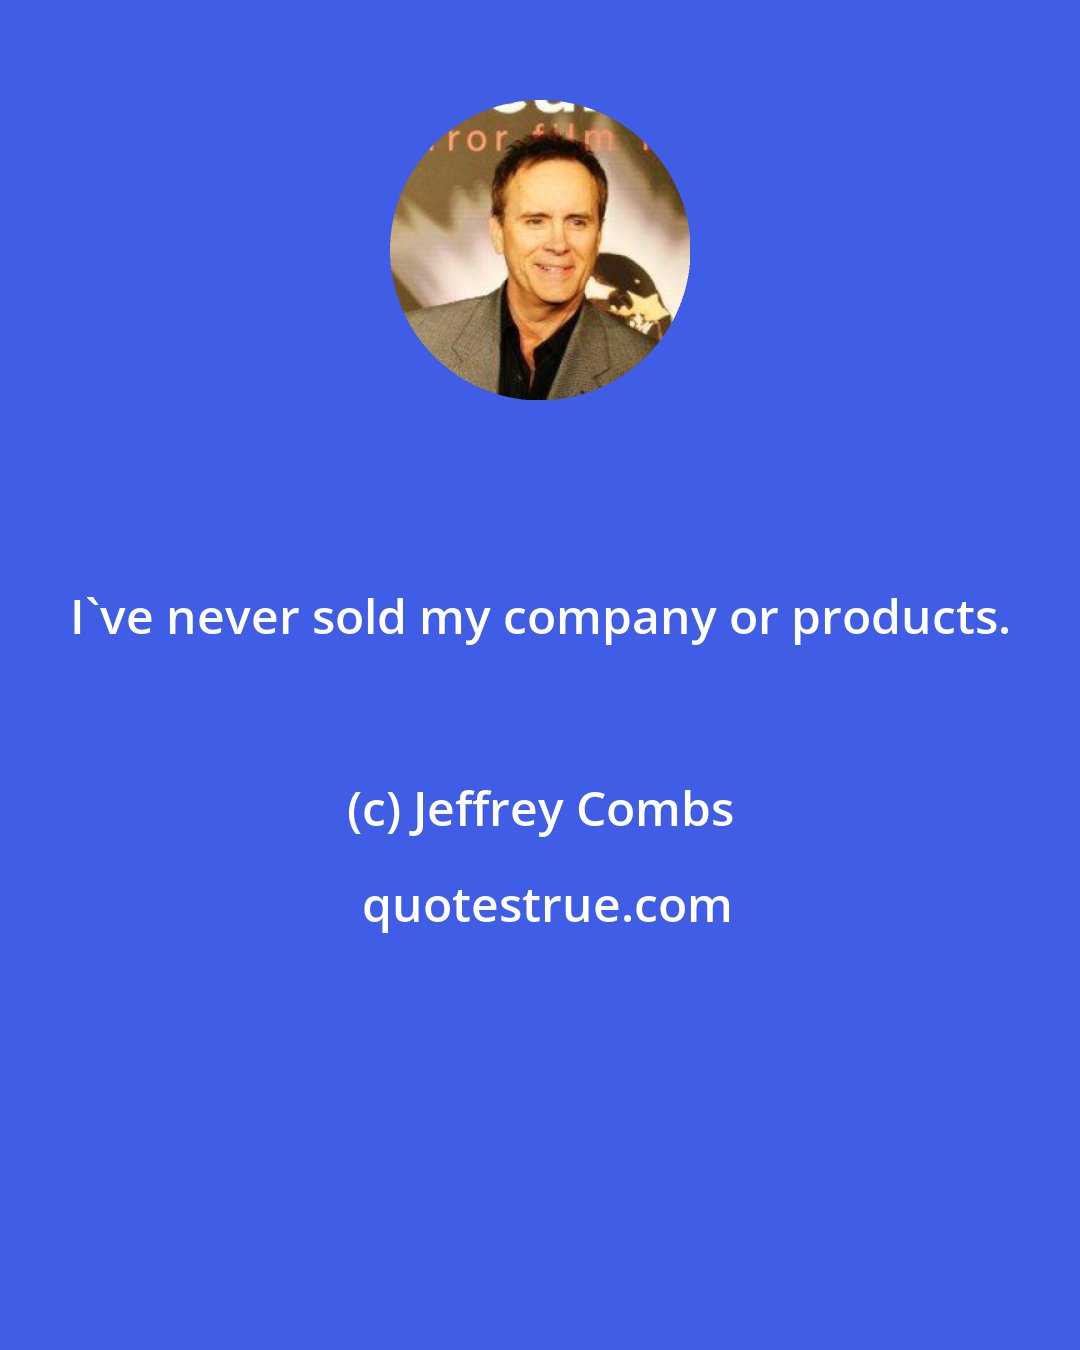 Jeffrey Combs: I've never sold my company or products.